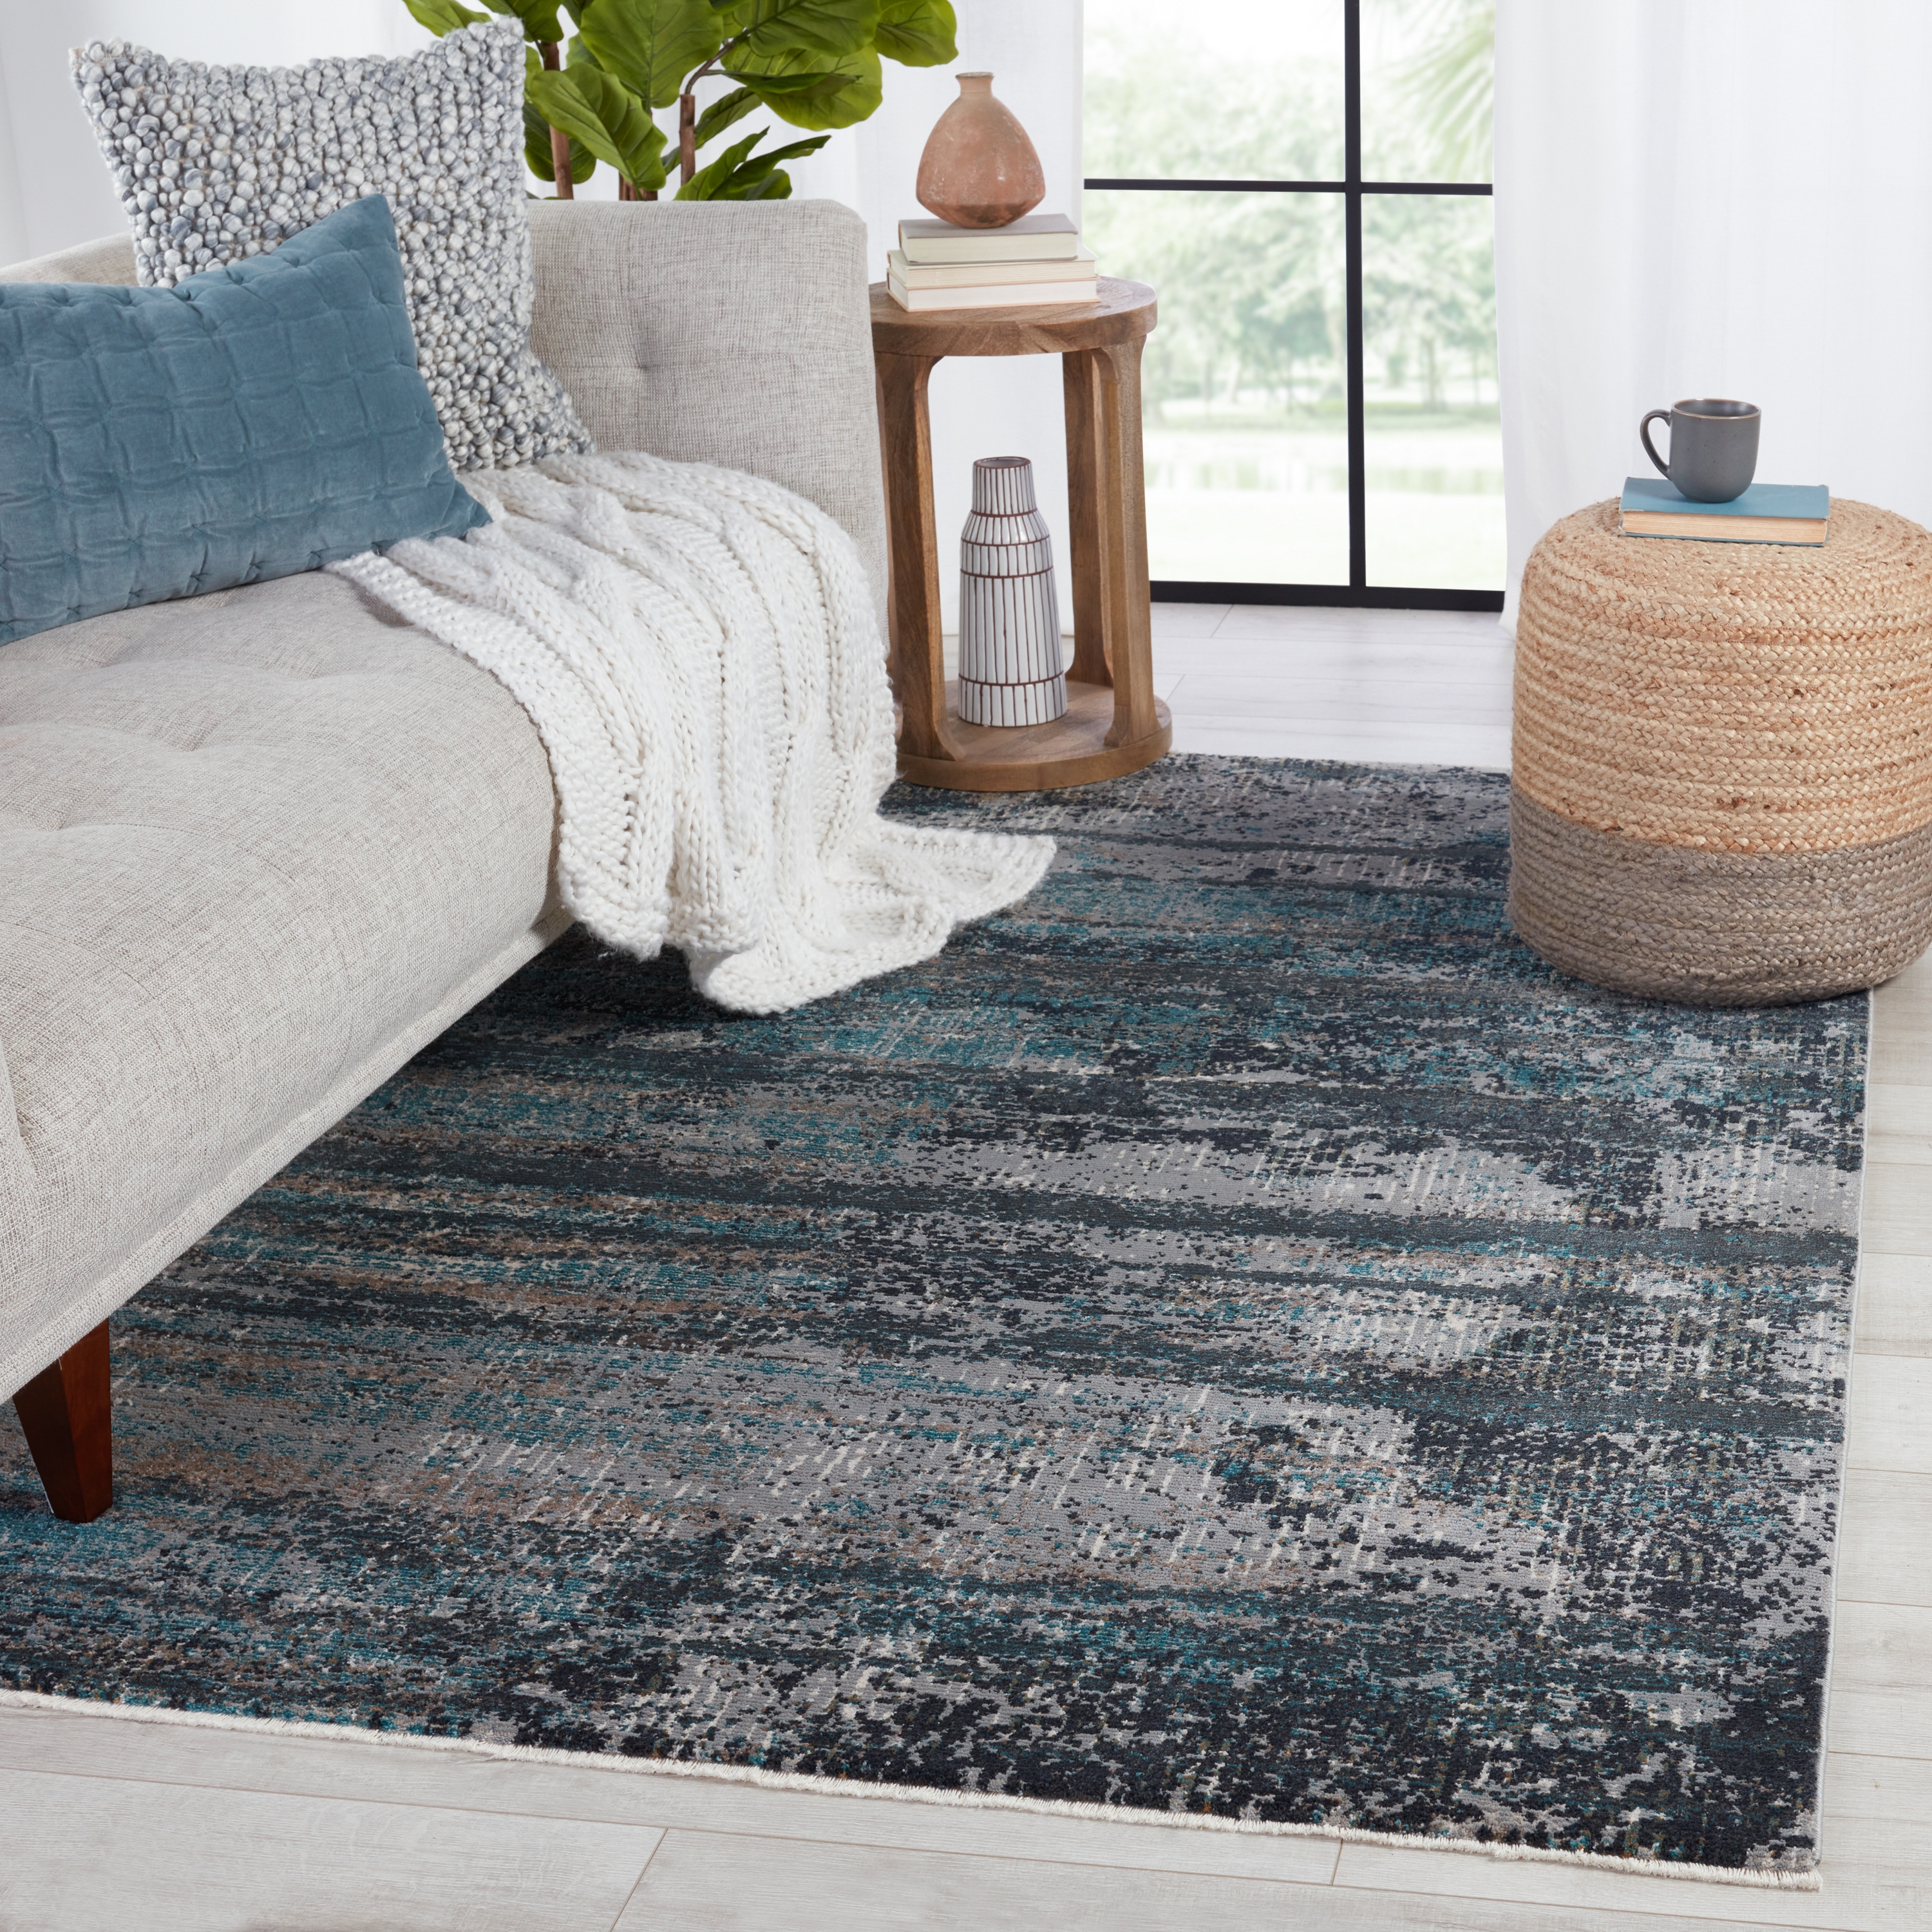 Vibe by Aubra Abstract Teal/ Gray Runner Rug (2'6"X12') - Image 5